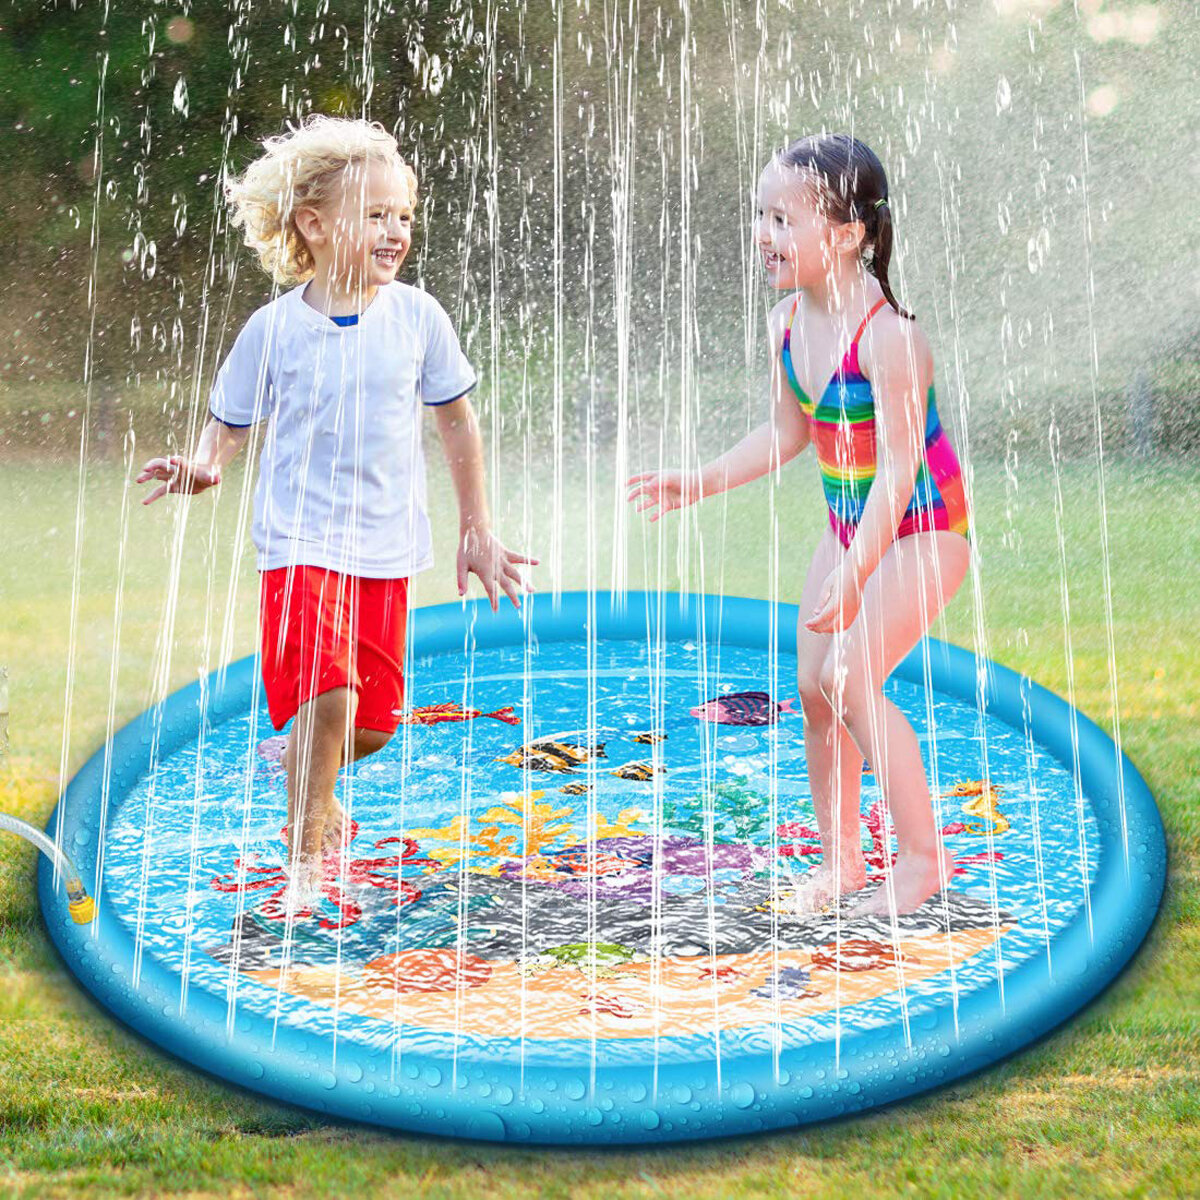 

67'' Splash Water Play Mat Sprinkle Splash Play Mat Toy for Outdoor Swimming Beach Lawn Inflatable Sprinkler Pad For Kid, Blue